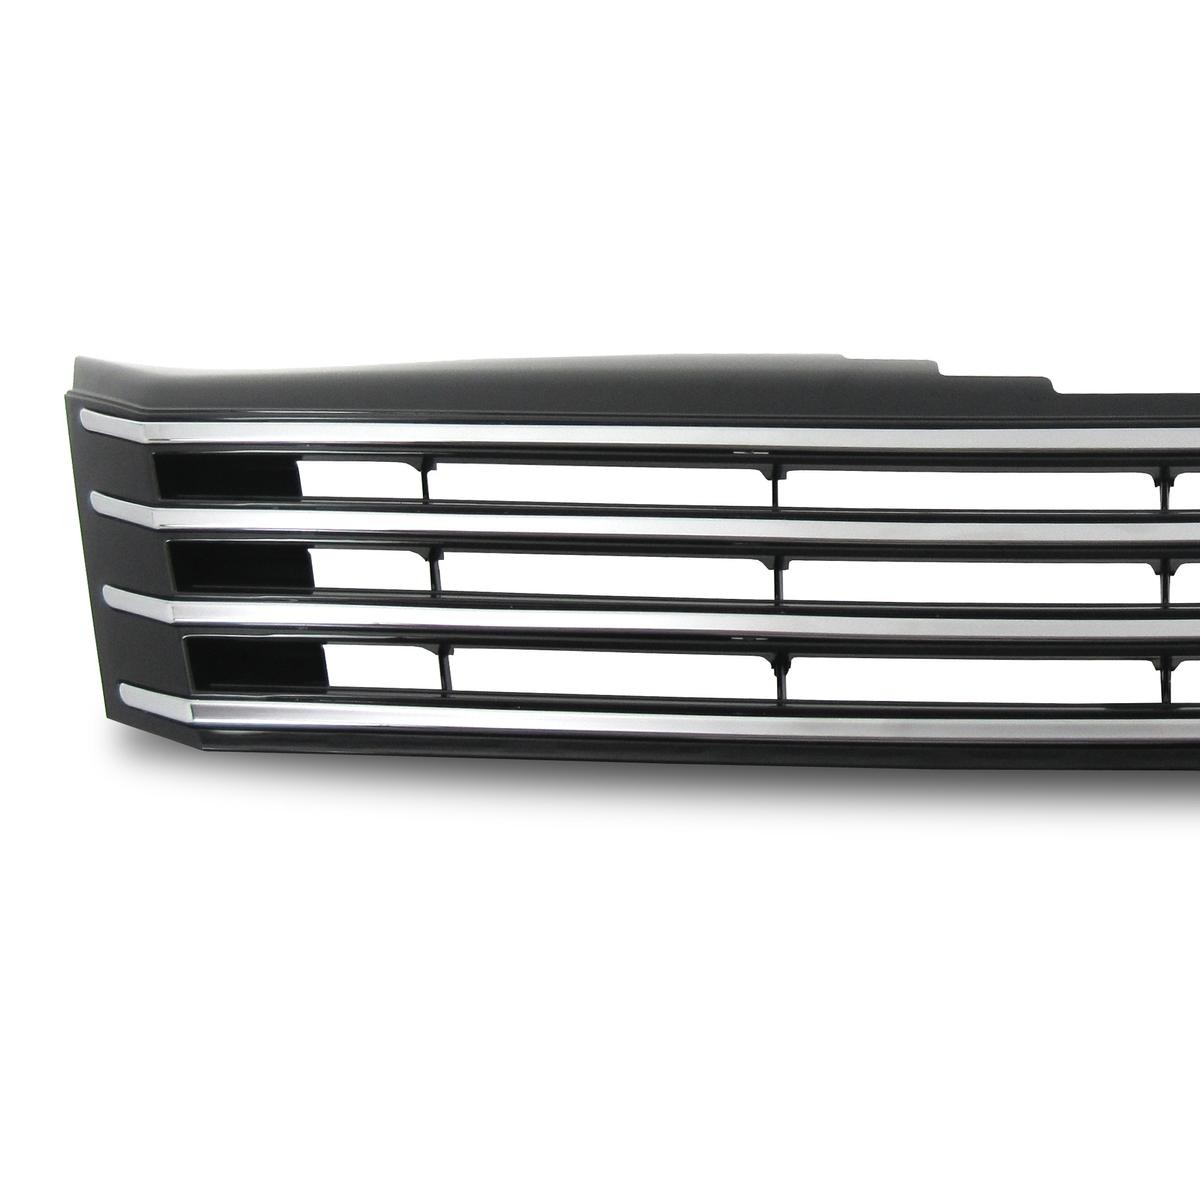 JOM Front Grill 3AA853653COE for BMW 5 Series, 1 Series, 2 Series